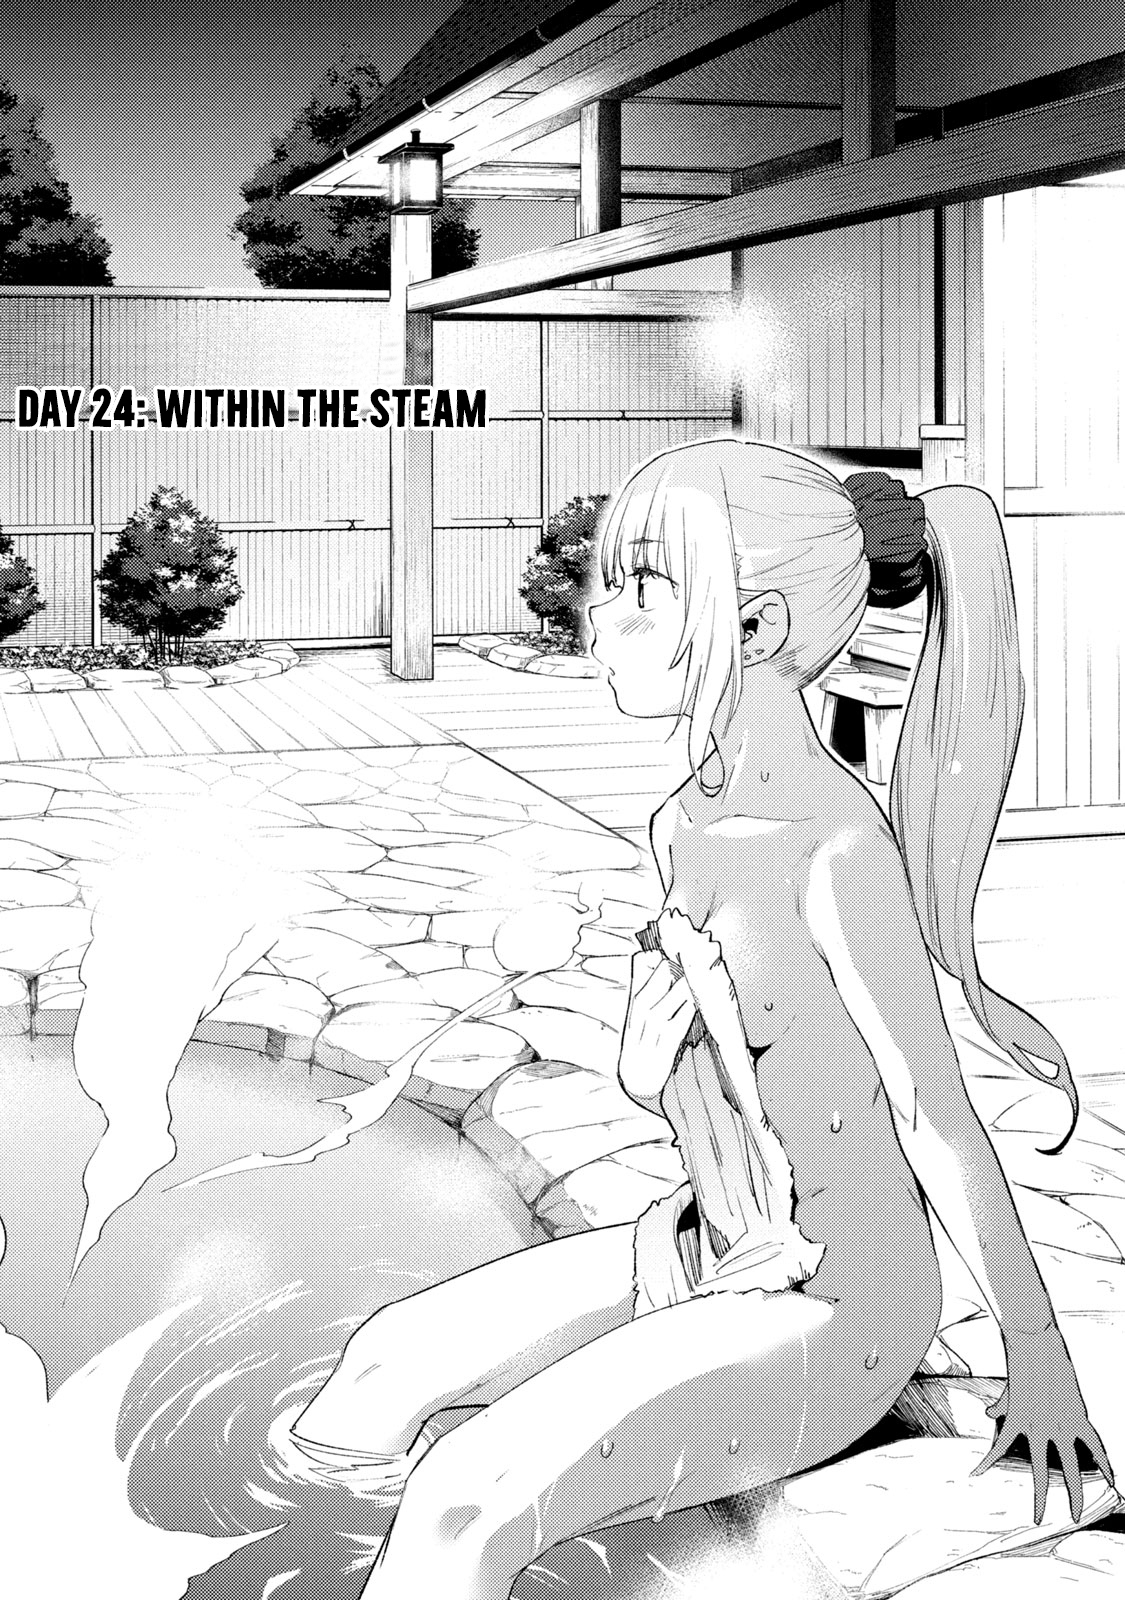 Megami No Sprinter Vol.4 Chapter 24: Within The Steam - Picture 3